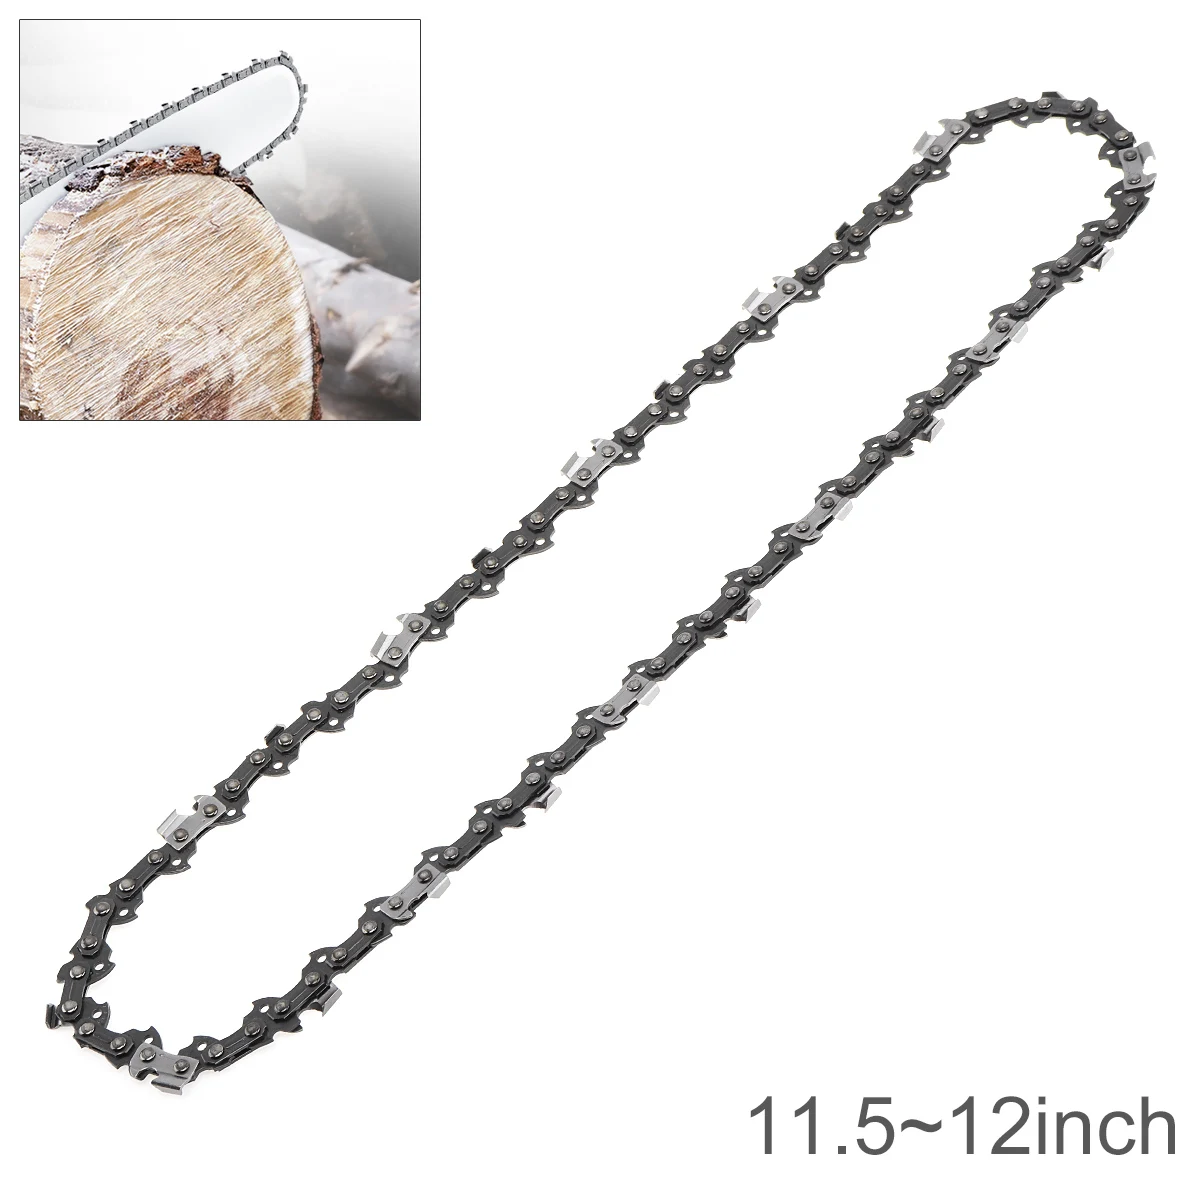 11.5-12'' Chainsaw Chain Blade Wood Cutting Chainsaw Parts 50-52 Drive 3/8 Pitch Chainsaw Saw Mill Chain Tool Accessories 16 inch chainsaw chain blade wood cutting drive links replacement parts for chain saw bar 3 8 pitch 050 gauge 55 dl chainsaws